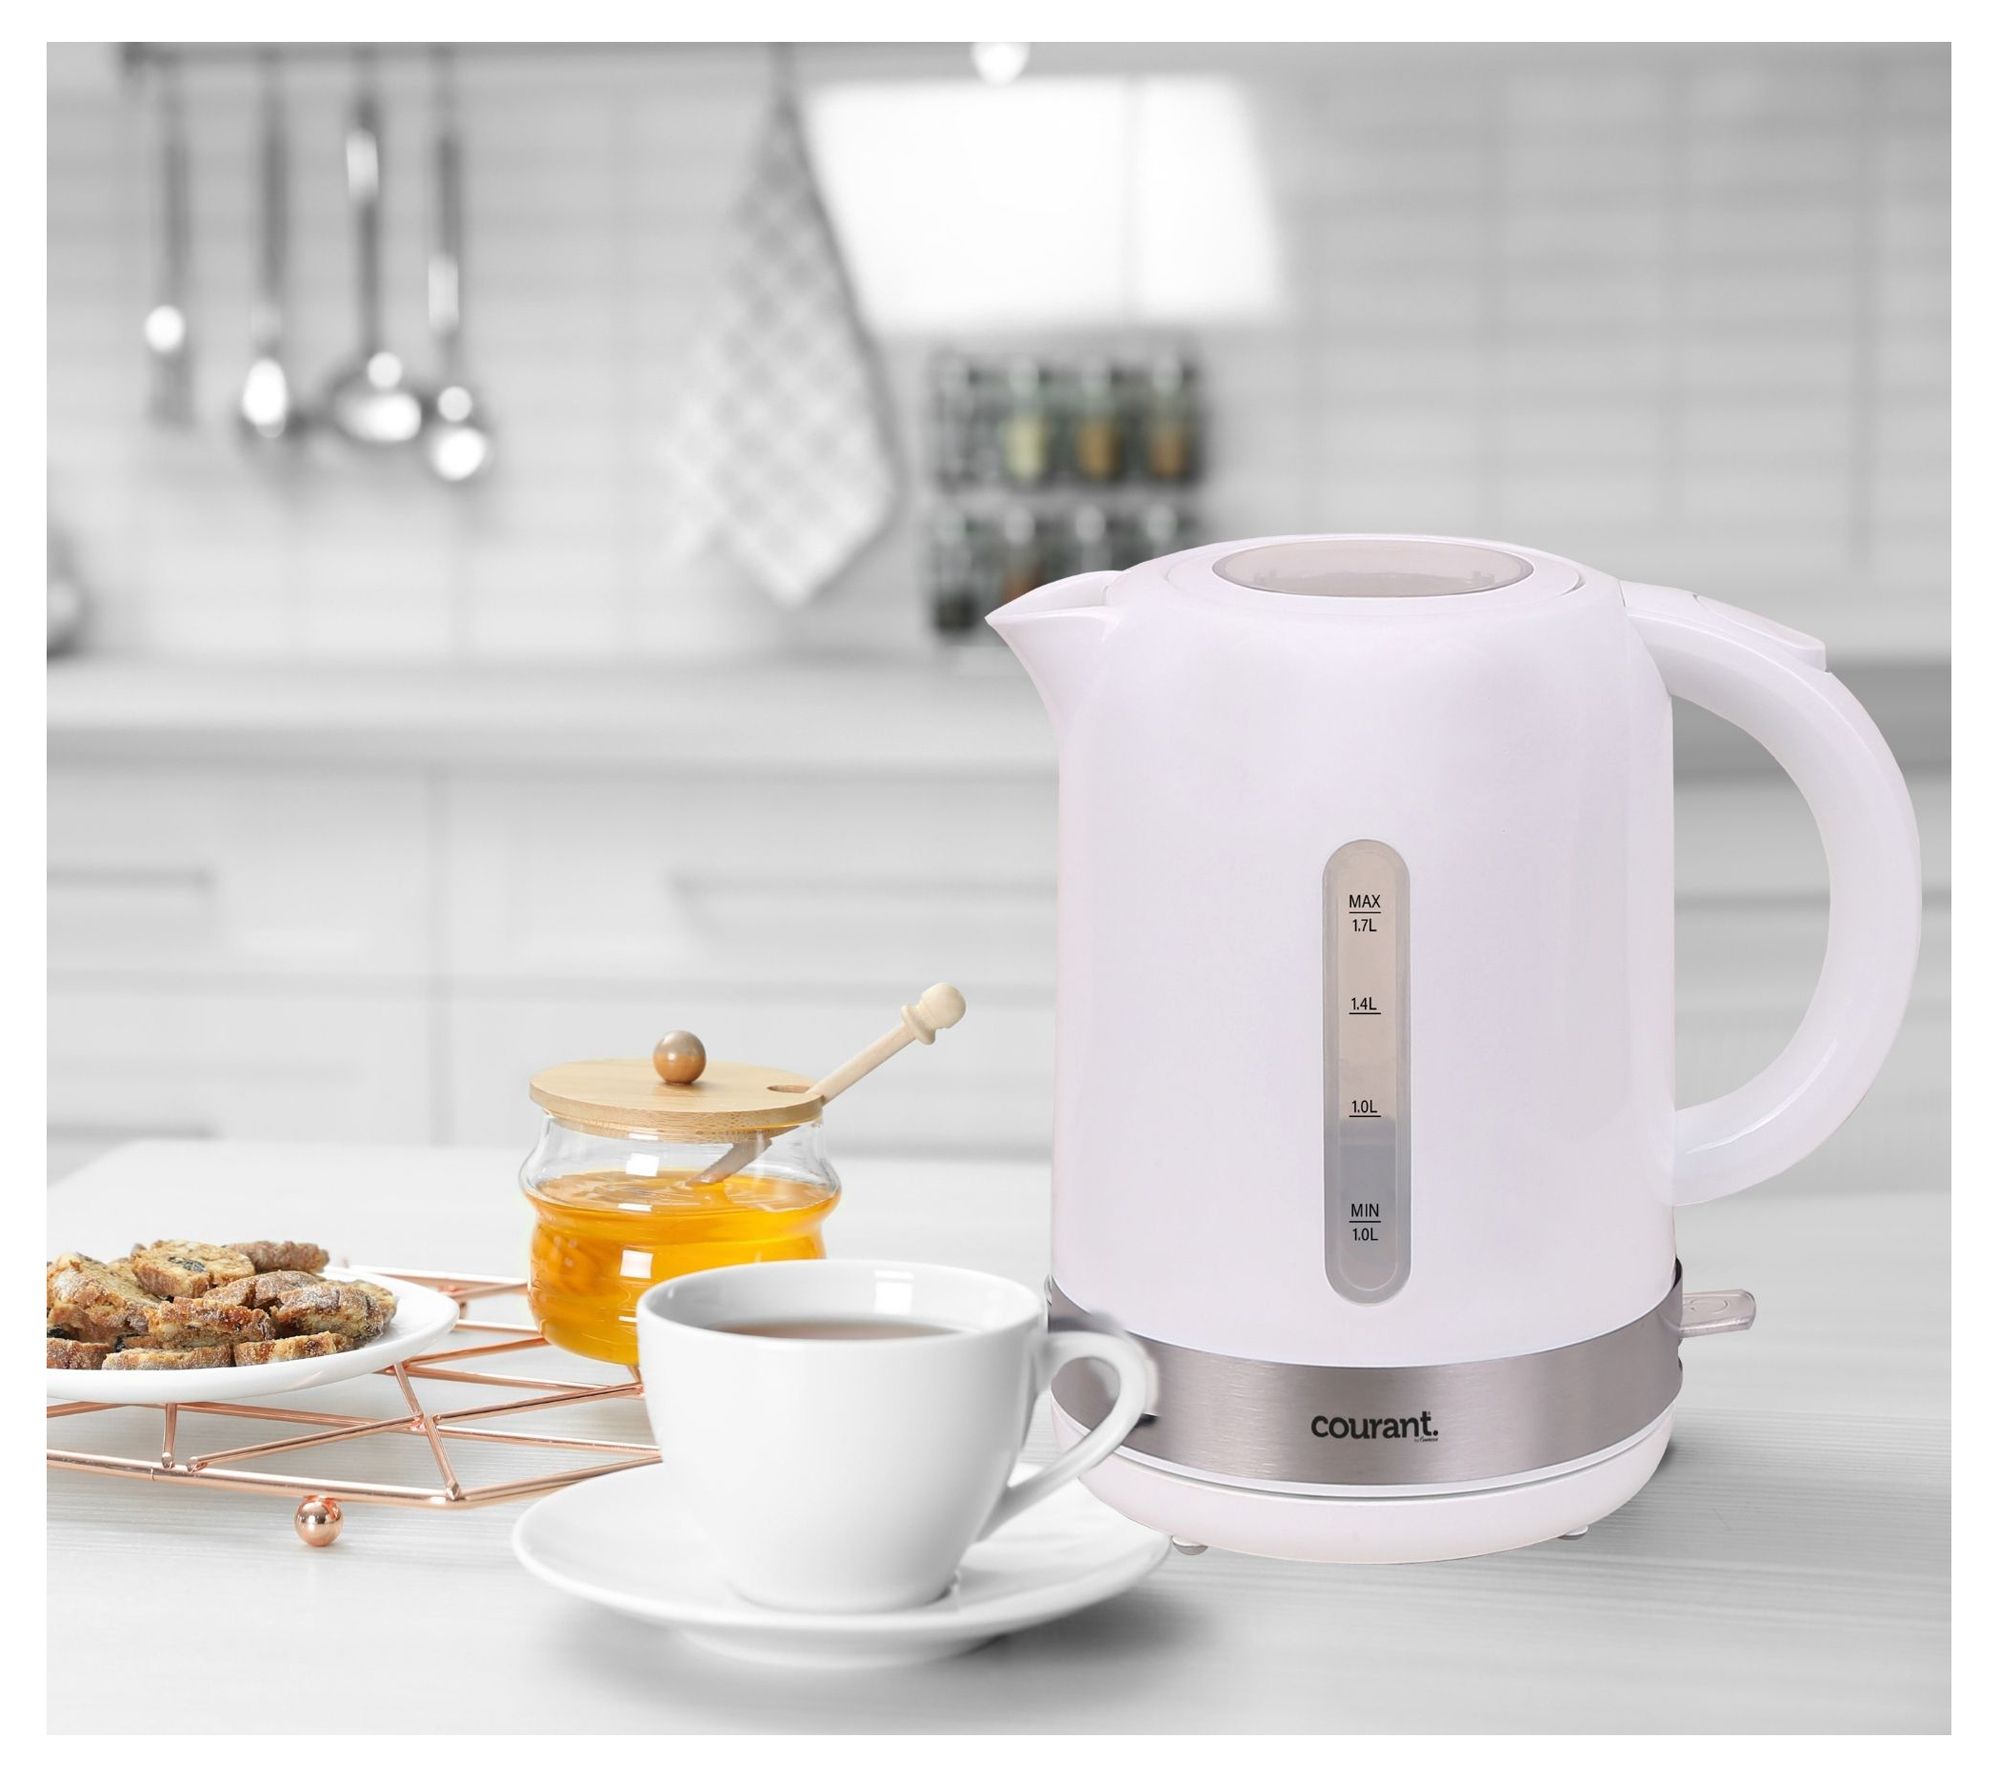 Brentwood Glass 1.7 Liter Electric Kettle with Tea Infuser in White